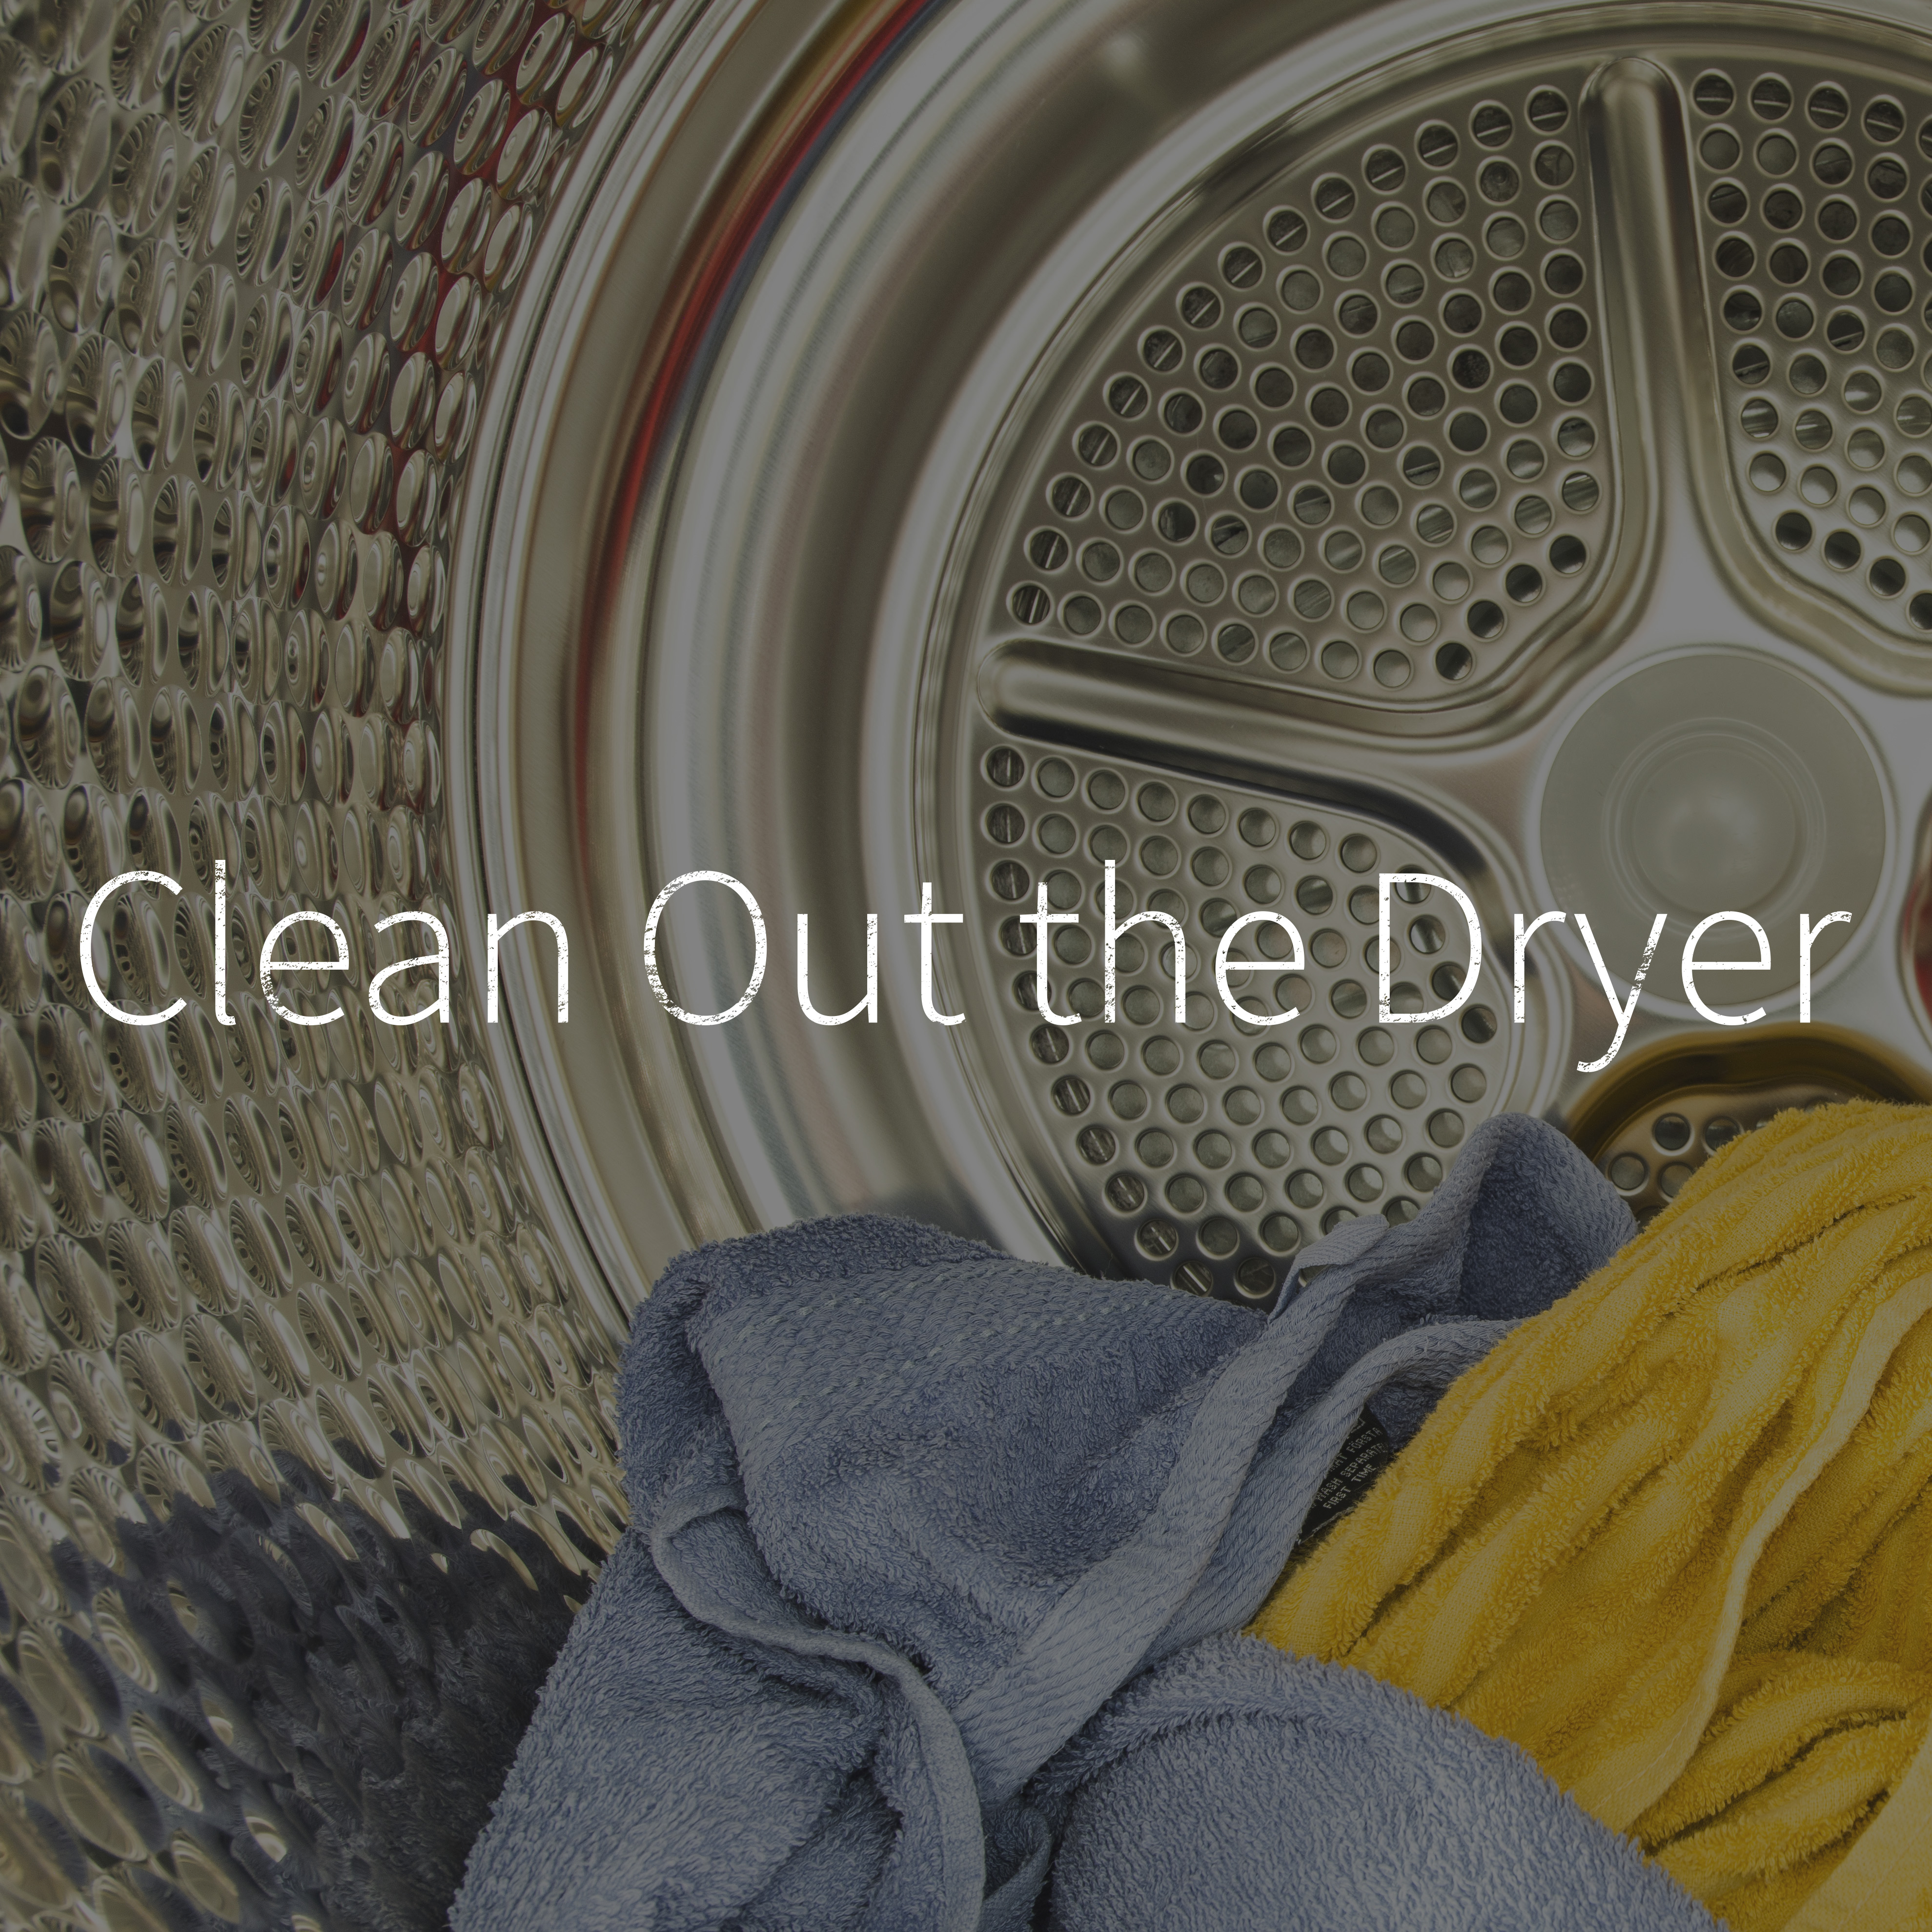 Clean out the dryer blog.jpg